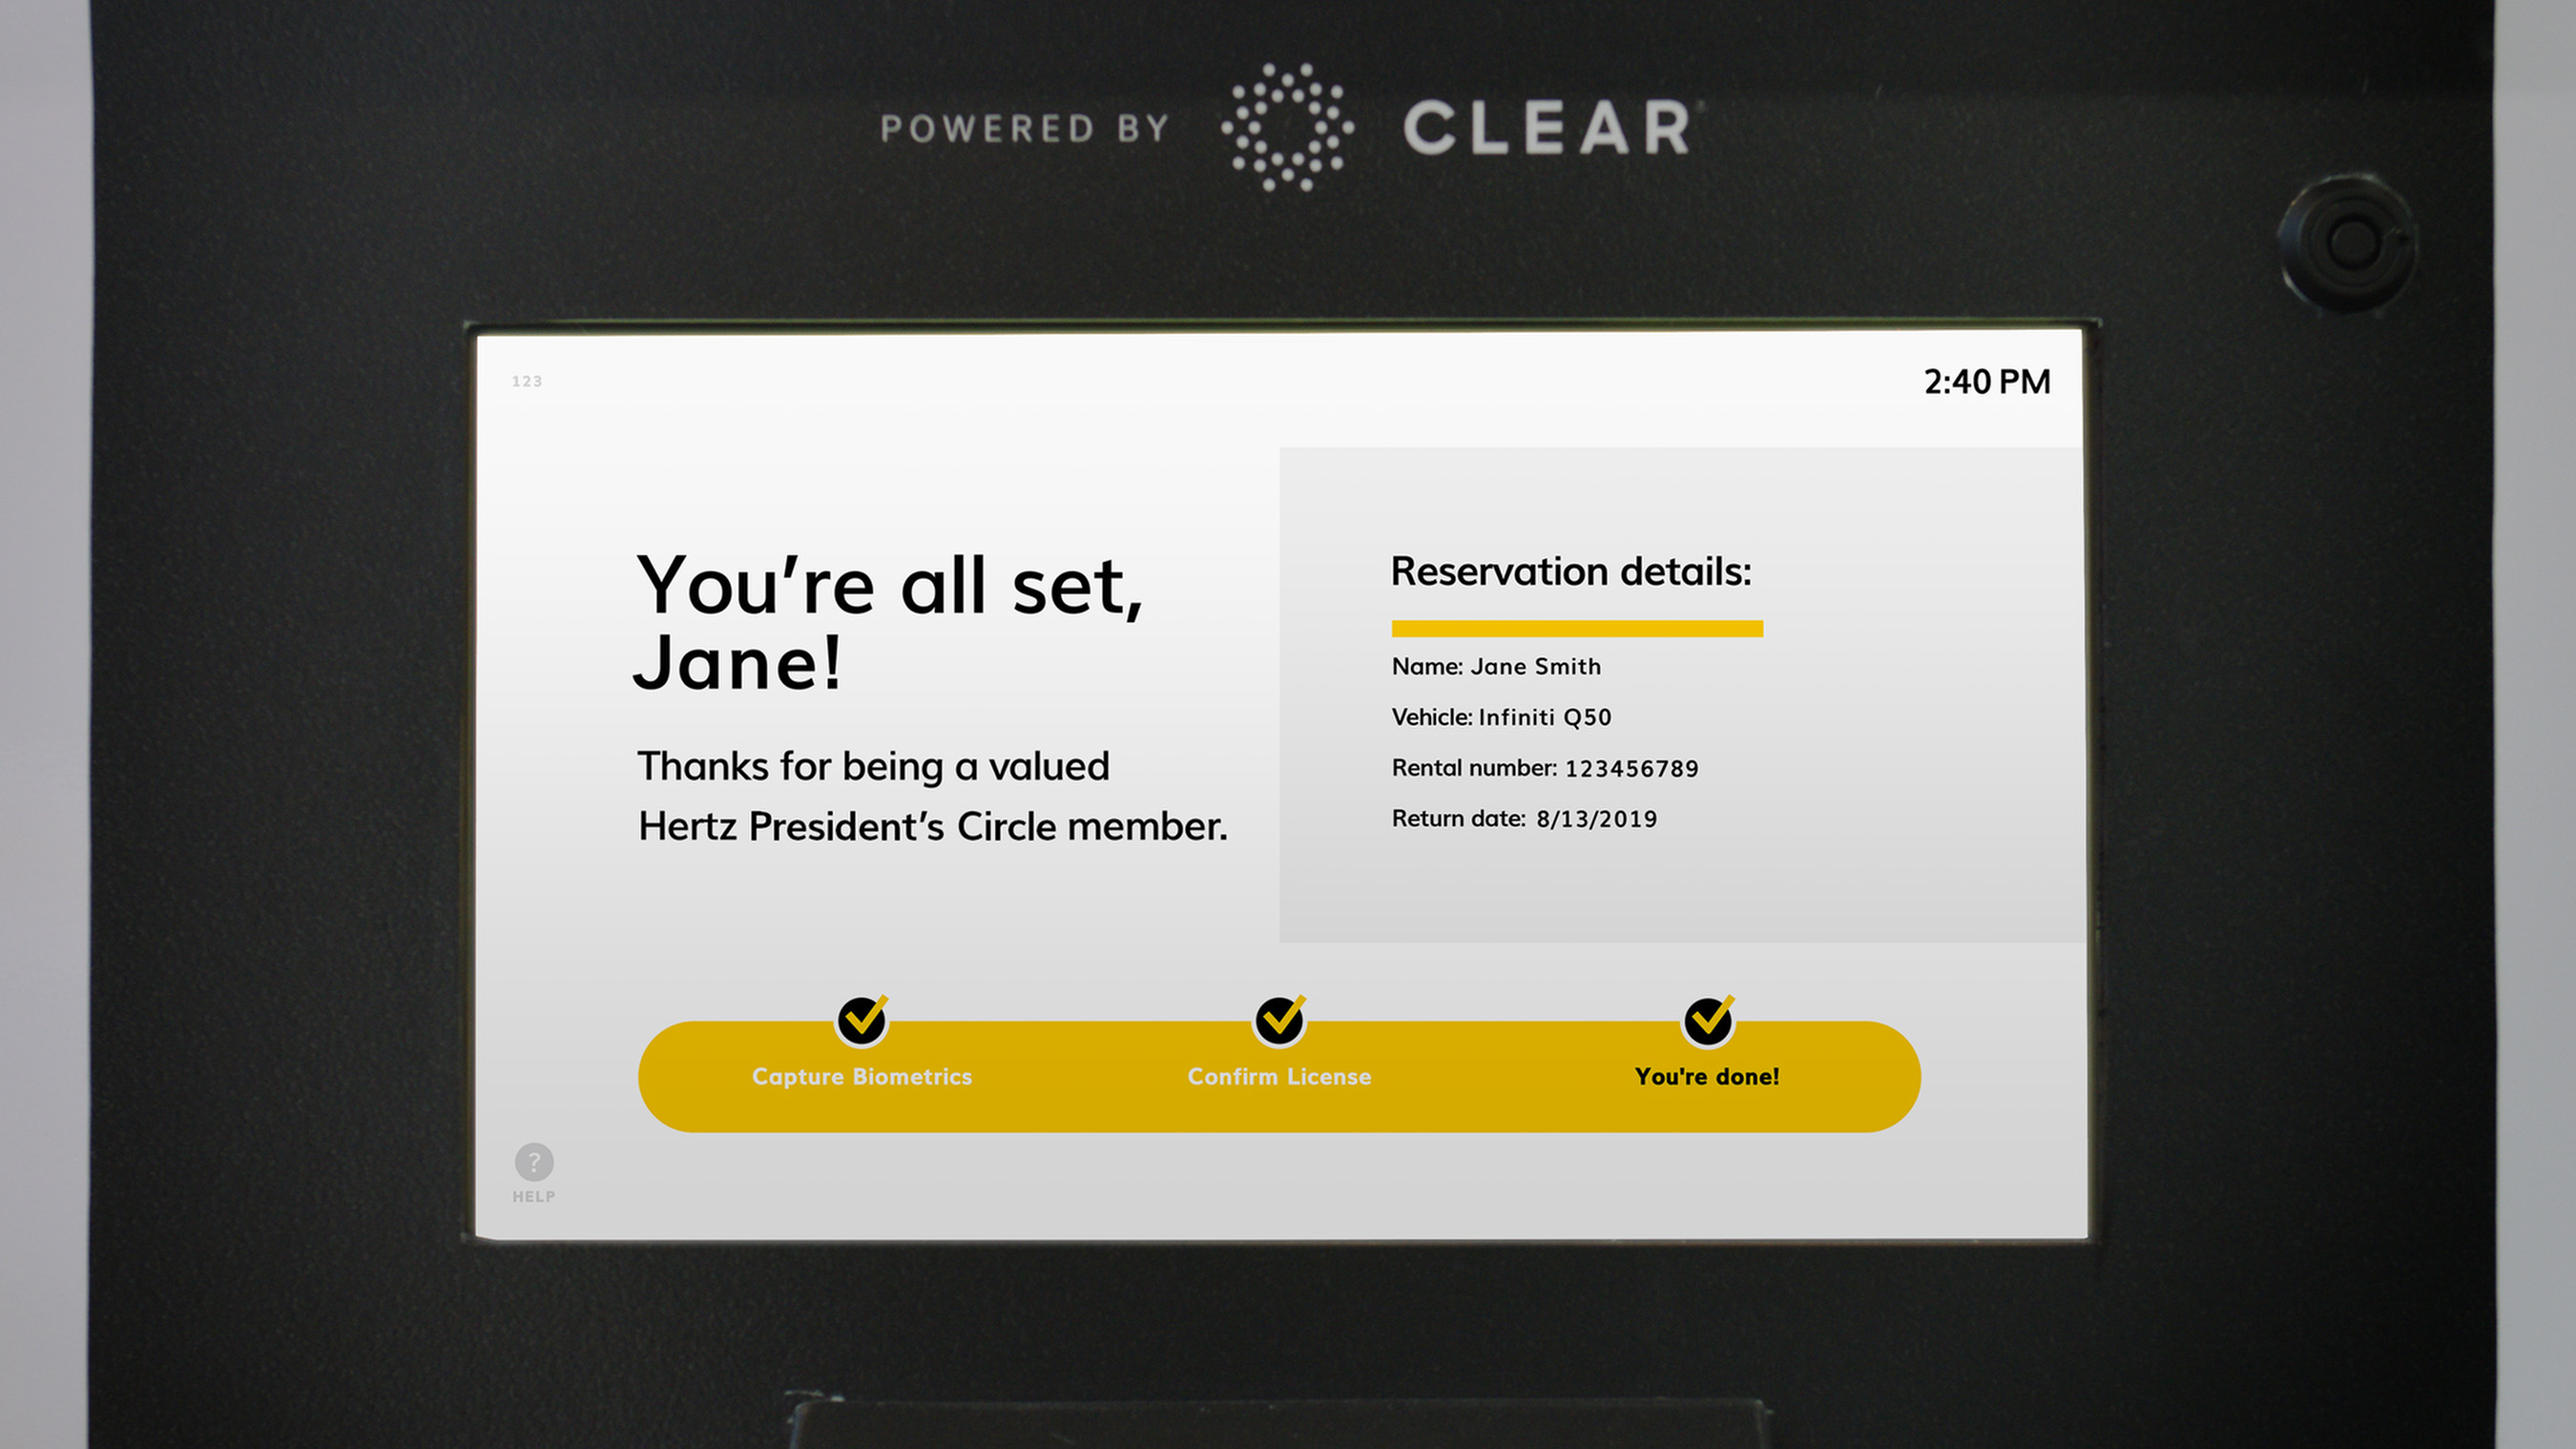 On Tuesday, Dec. 11, 2018 Hertz and CLEAR announced the Hertz Fast Lane powered by CLEAR, a new service that uses biometrics, allowing travelers to get through the exit gate and on the road in 30 seconds or less with just a look or tap of their finger. It is now available at the Hartsfield-Jackson Atlanta International Airport (ATL), with 40 more locations expected in 2019.